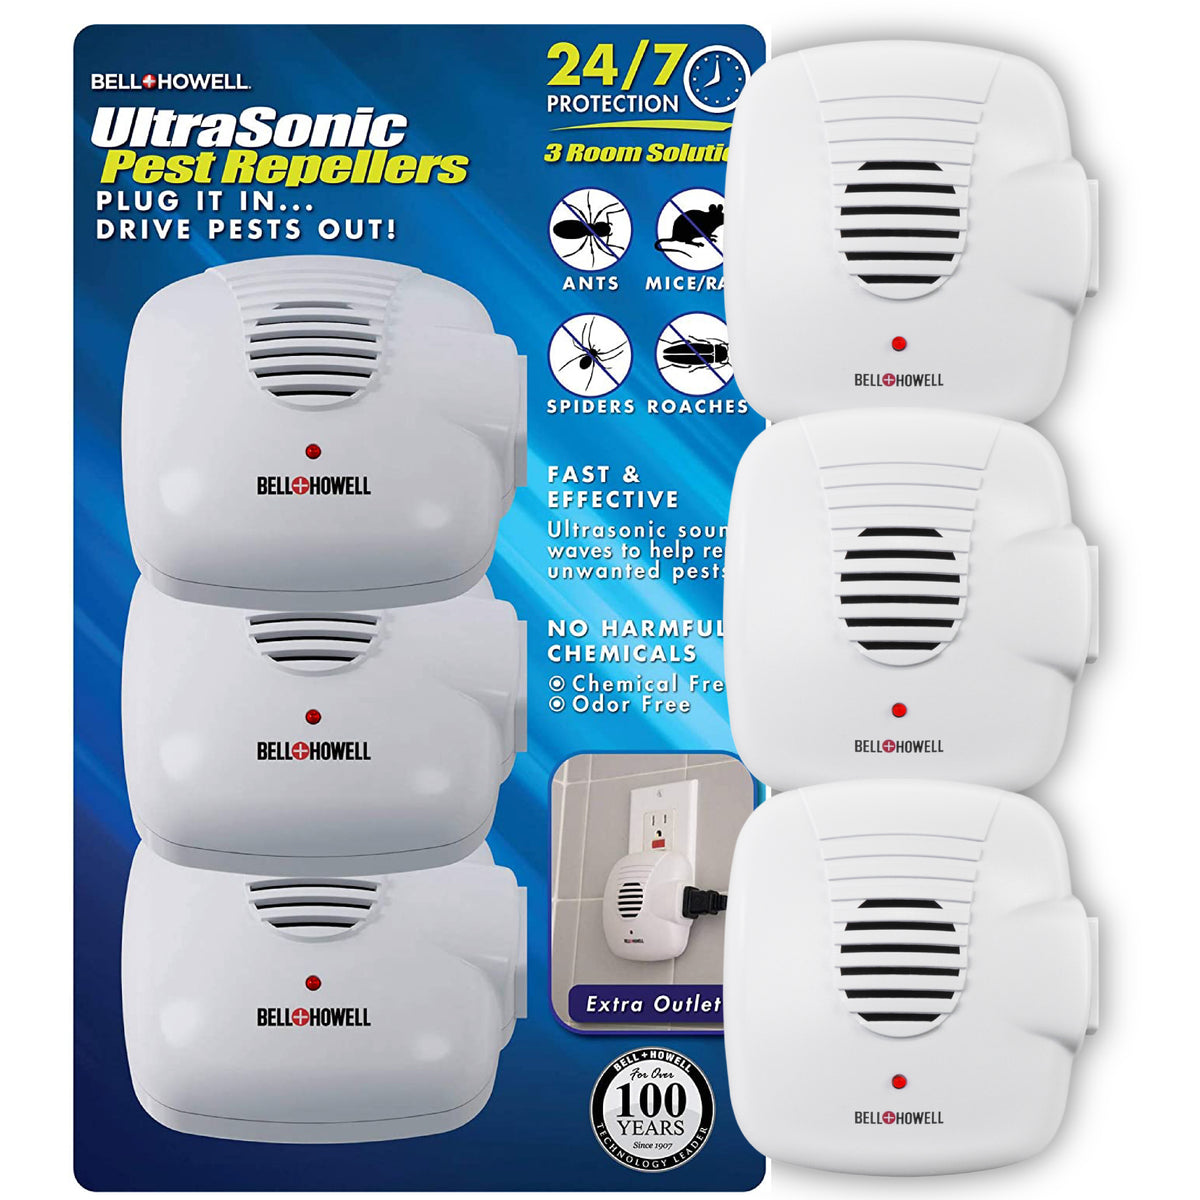 Bell+Howell Ultrasonic Pest Repeller With AC Outlet - Set of